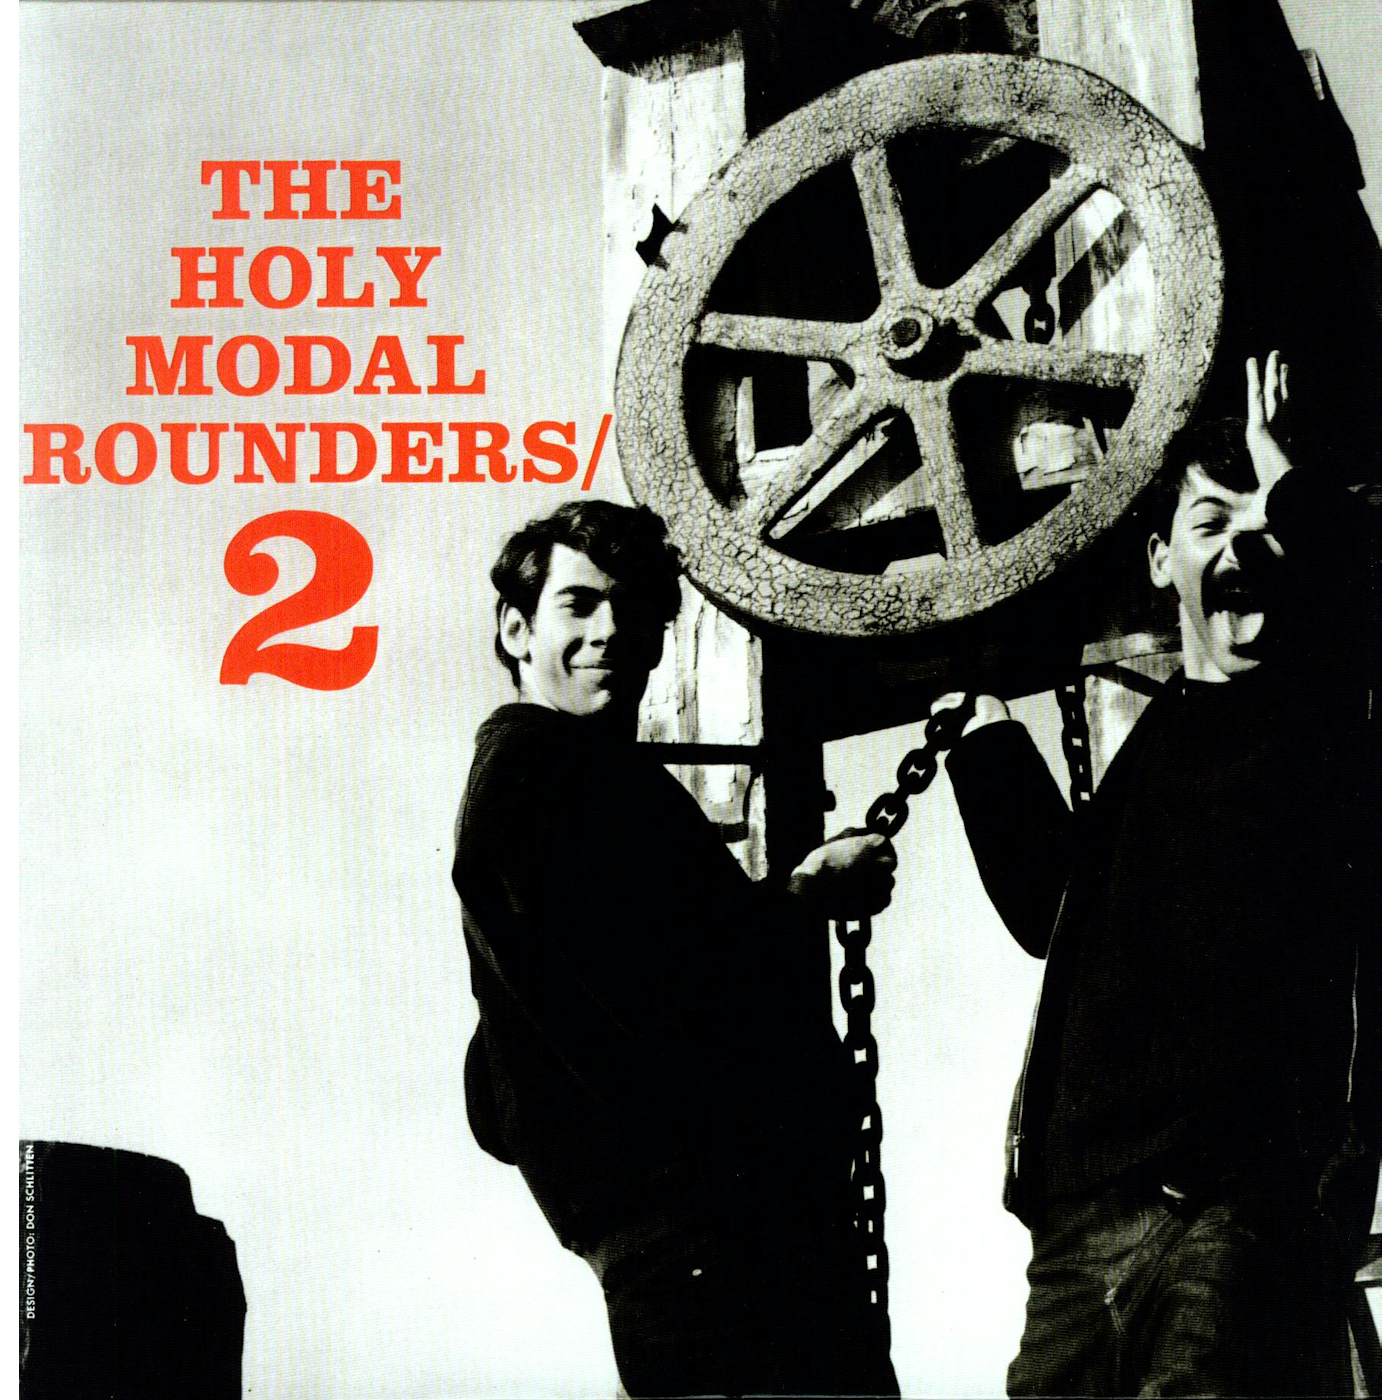 The Holy Modal Rounders 2 Vinyl Record